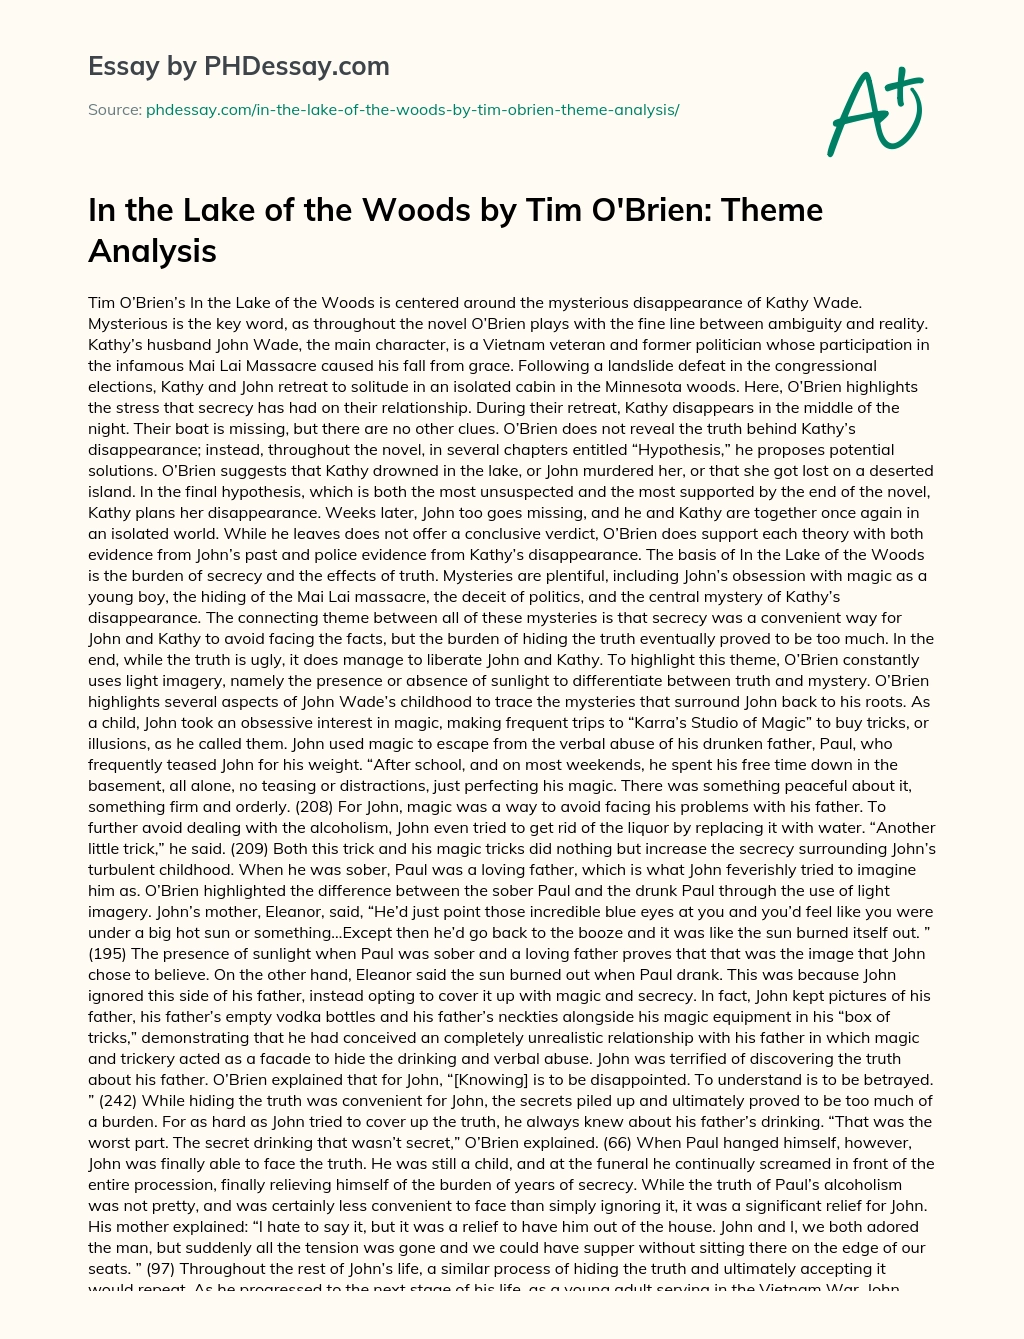 In the Lake of the Woods by Tim O’Brien: Theme Analysis essay